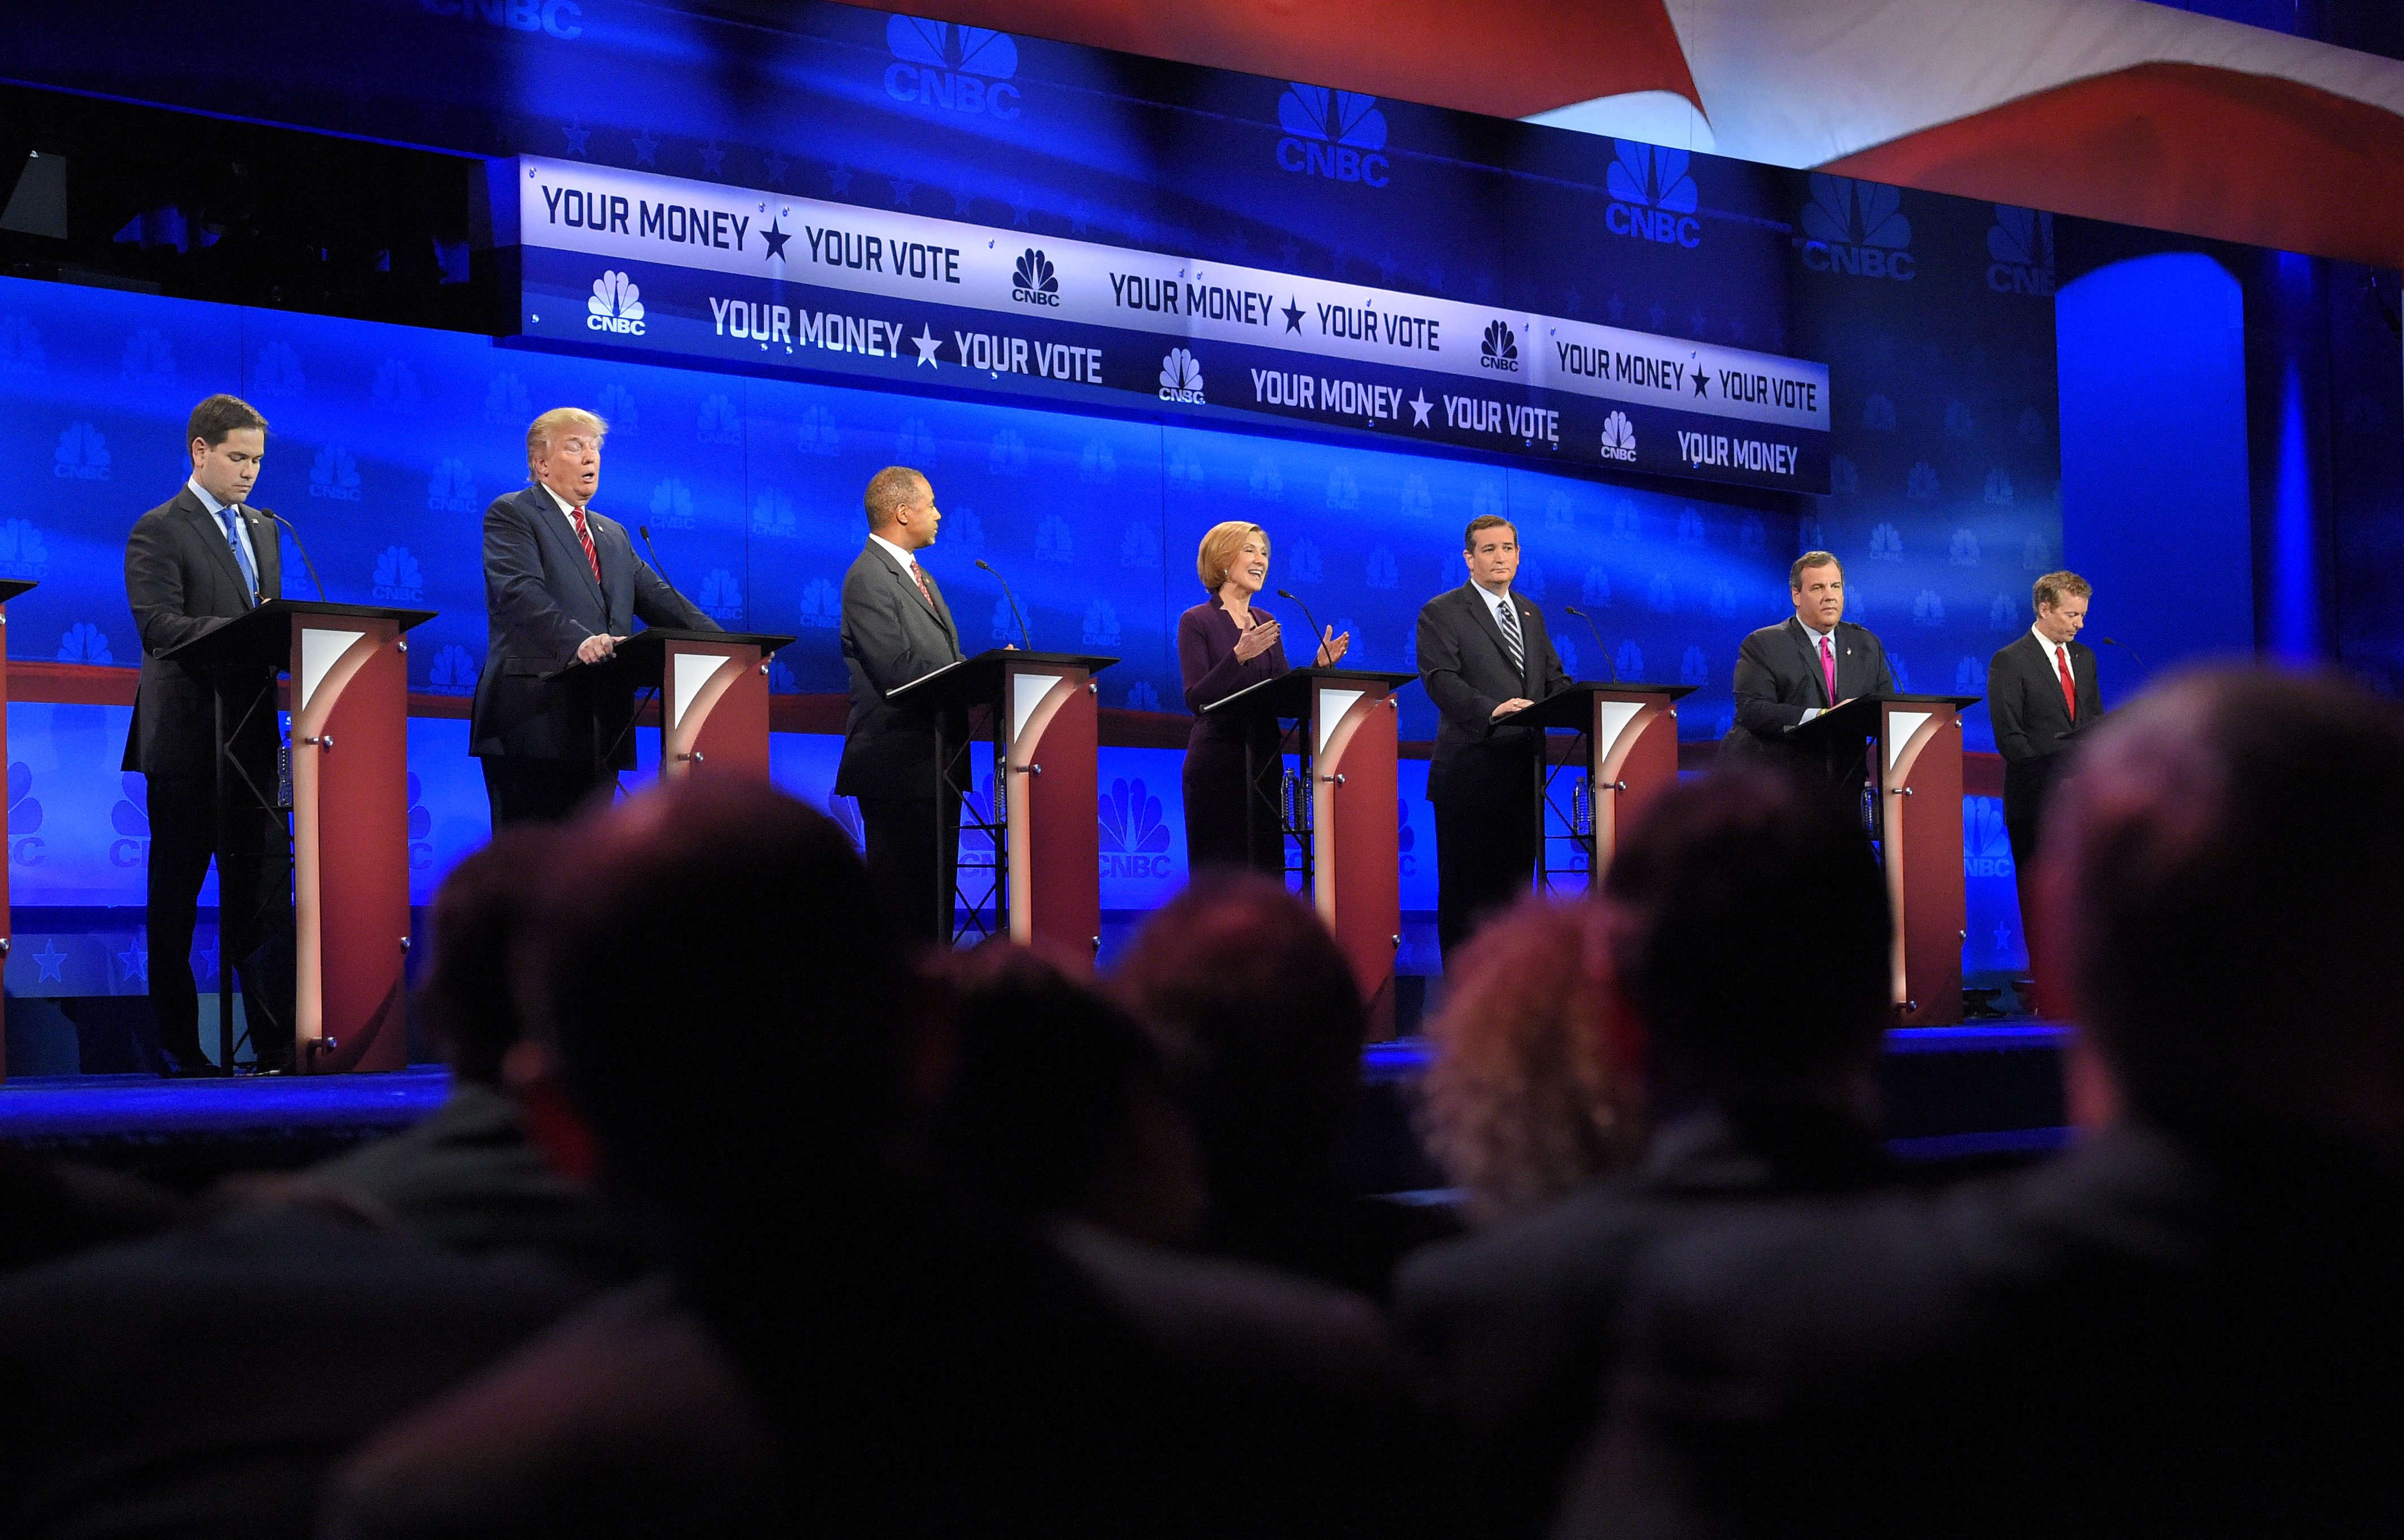 Republican presidential candidates, from left, Marco Rubio, Donald Trump, Ben Carson, Carly Fiorina, Ted Cruz, Chris Christie, and Rand Paul take the stage during the CNBC Republican presidential debate at the University of Colorado on Oct. 28, 2015, in Boulder, Colo.